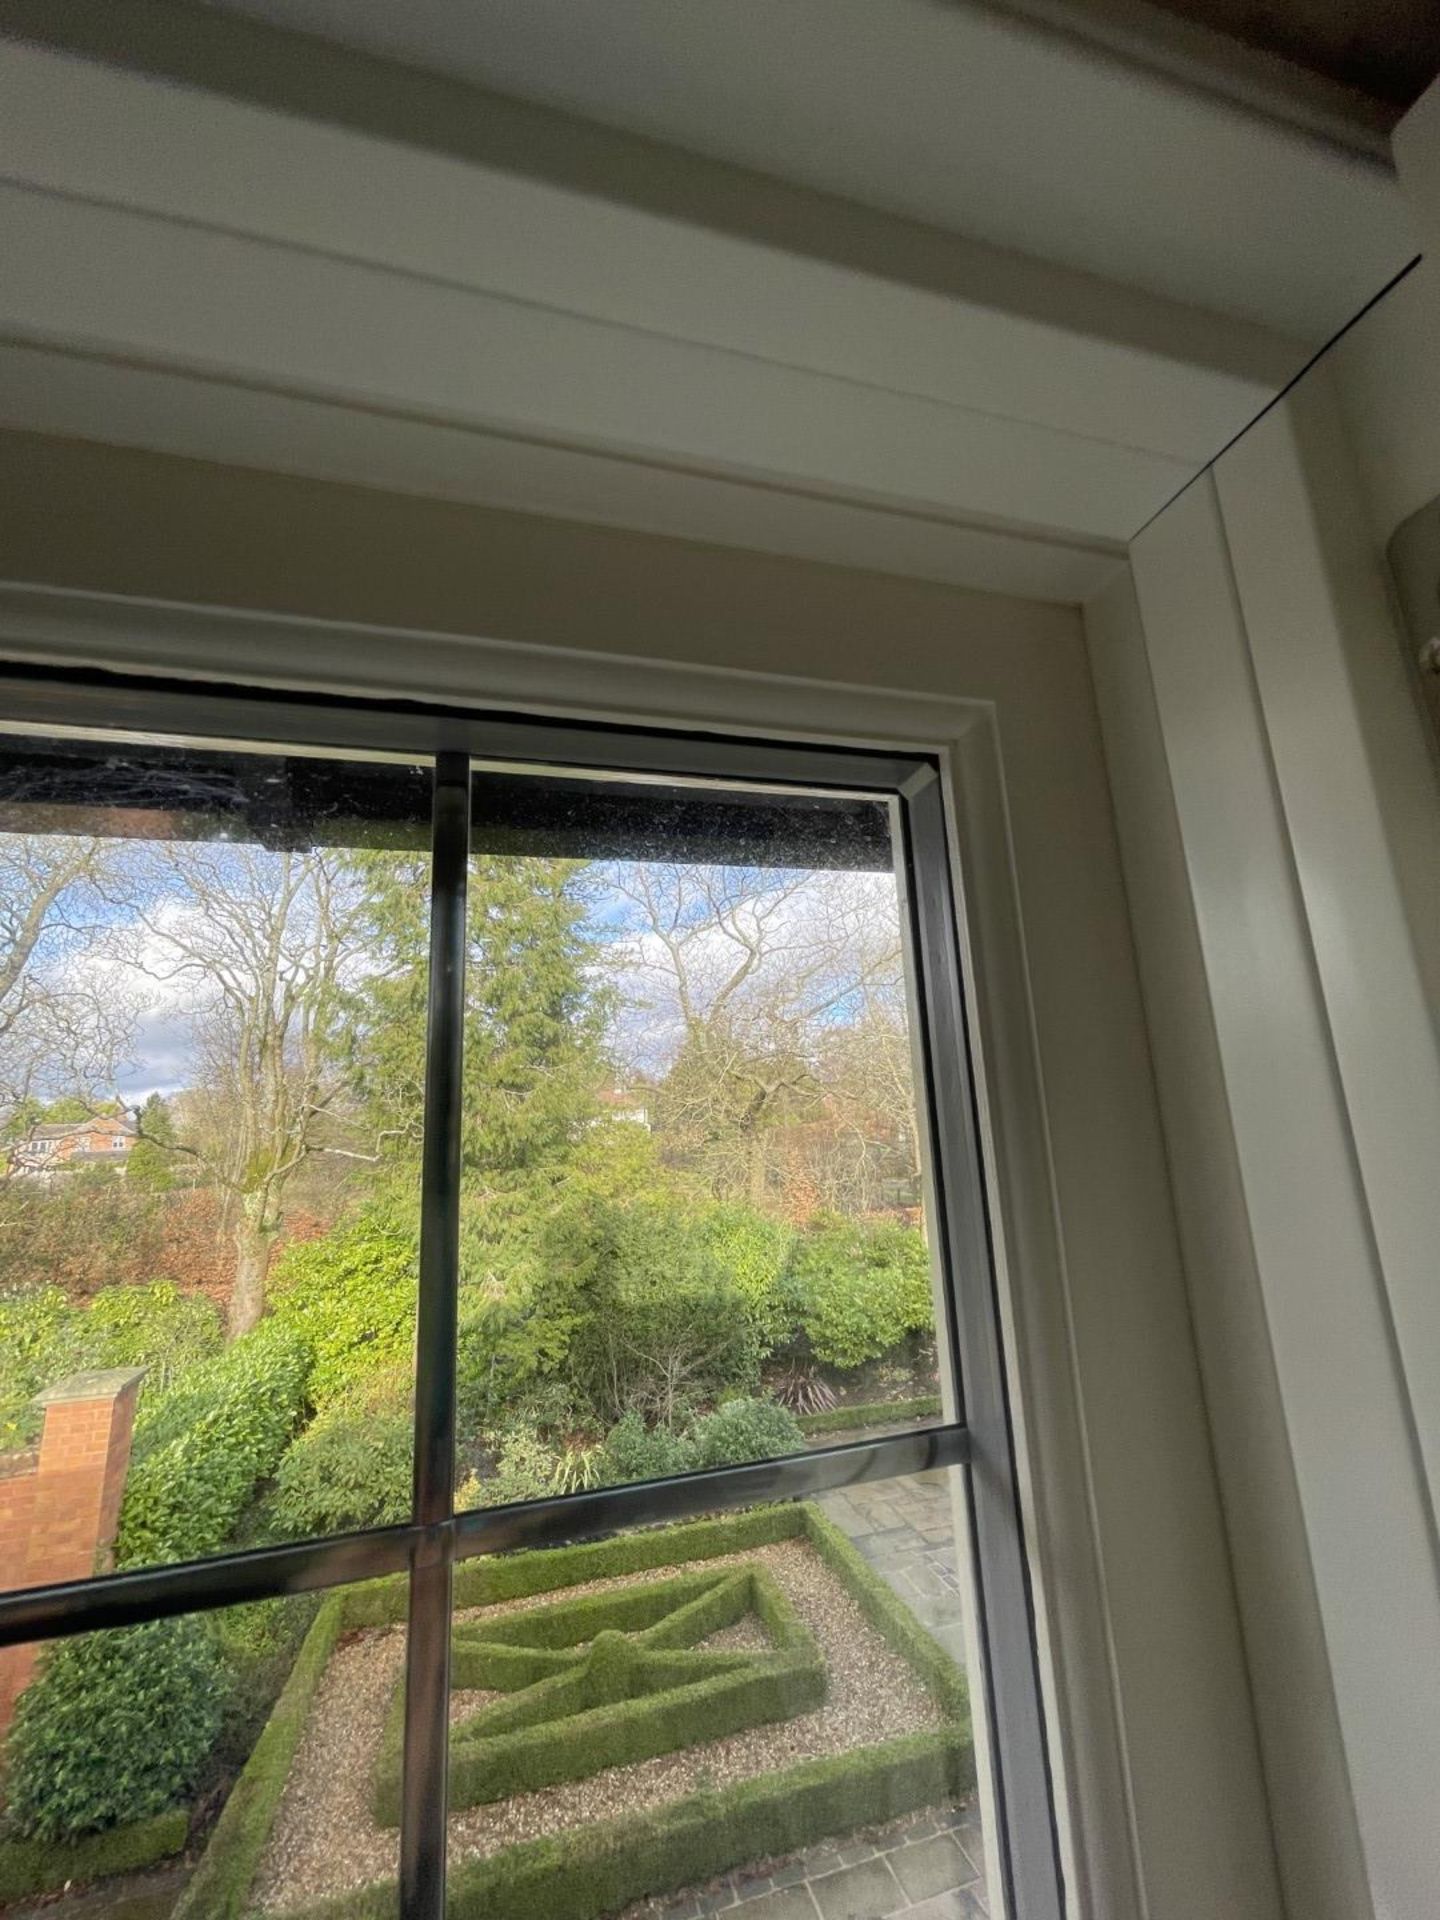 1 x Hardwood Timber Double Glazed Leaded 3-Pane Window Frame fitted with Shutter Blinds - Image 10 of 15